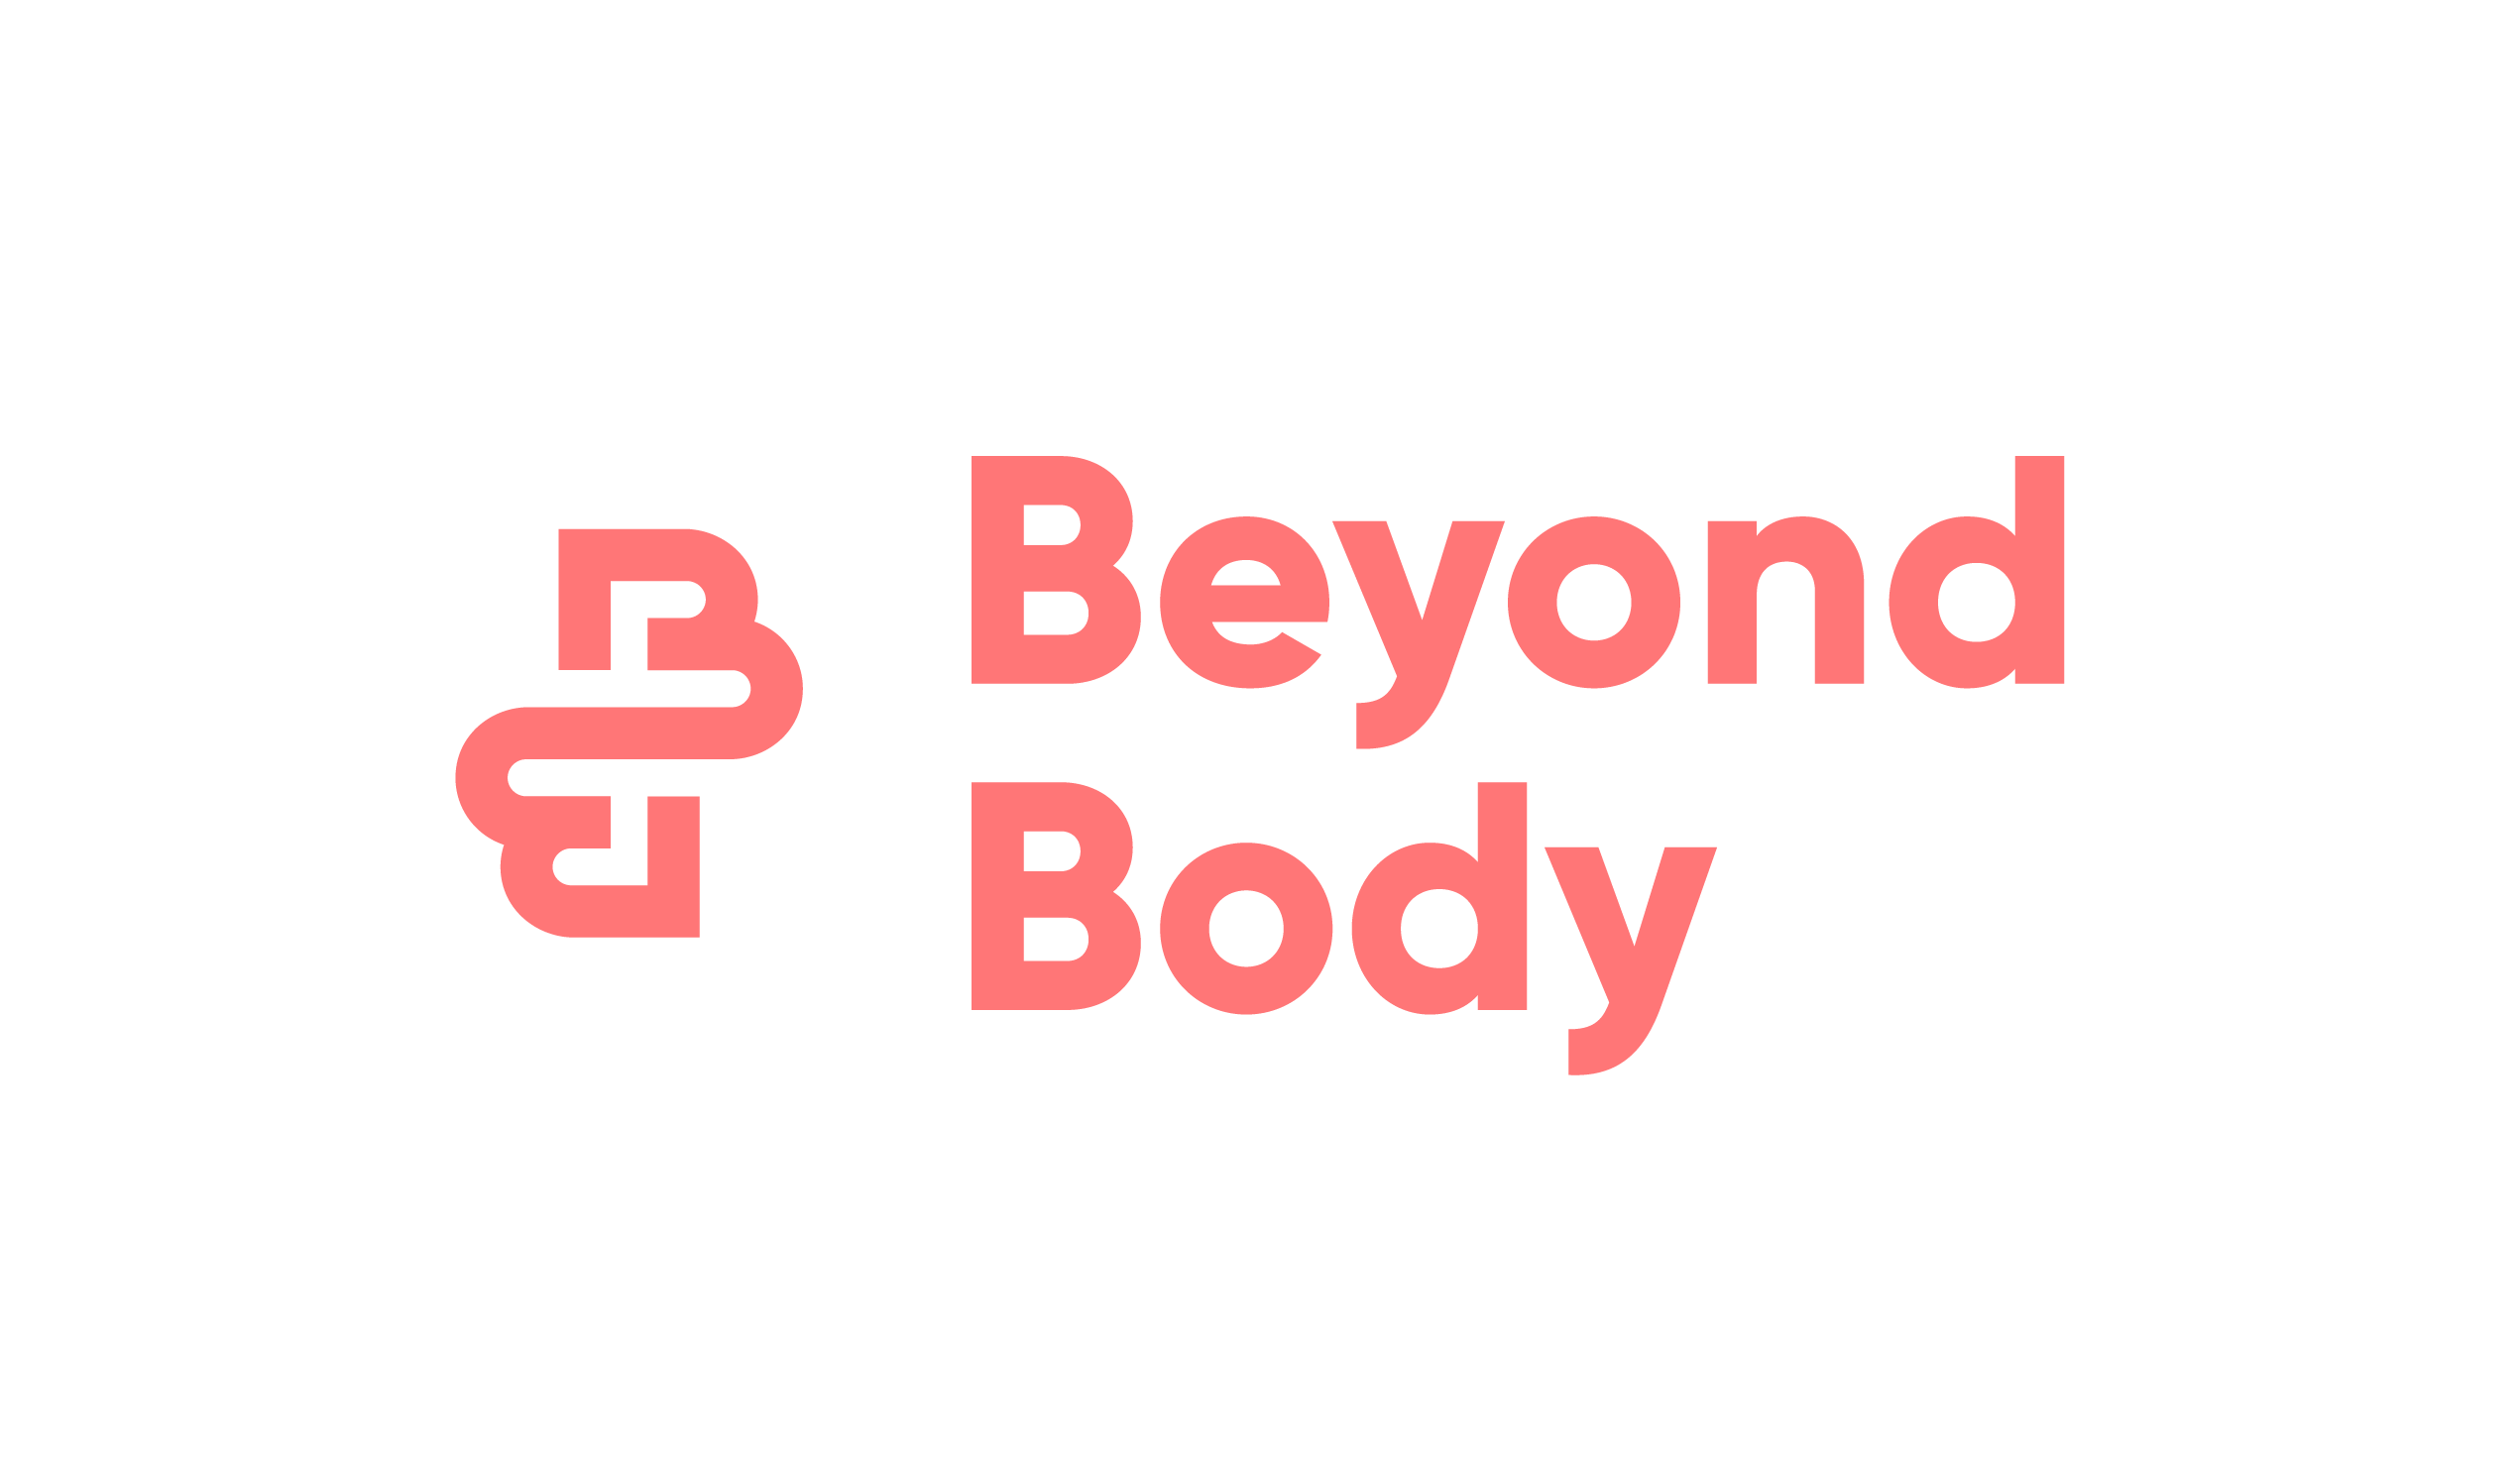 BEYOND BODY - Up to 60% off Personalized wellness book + Free shipping